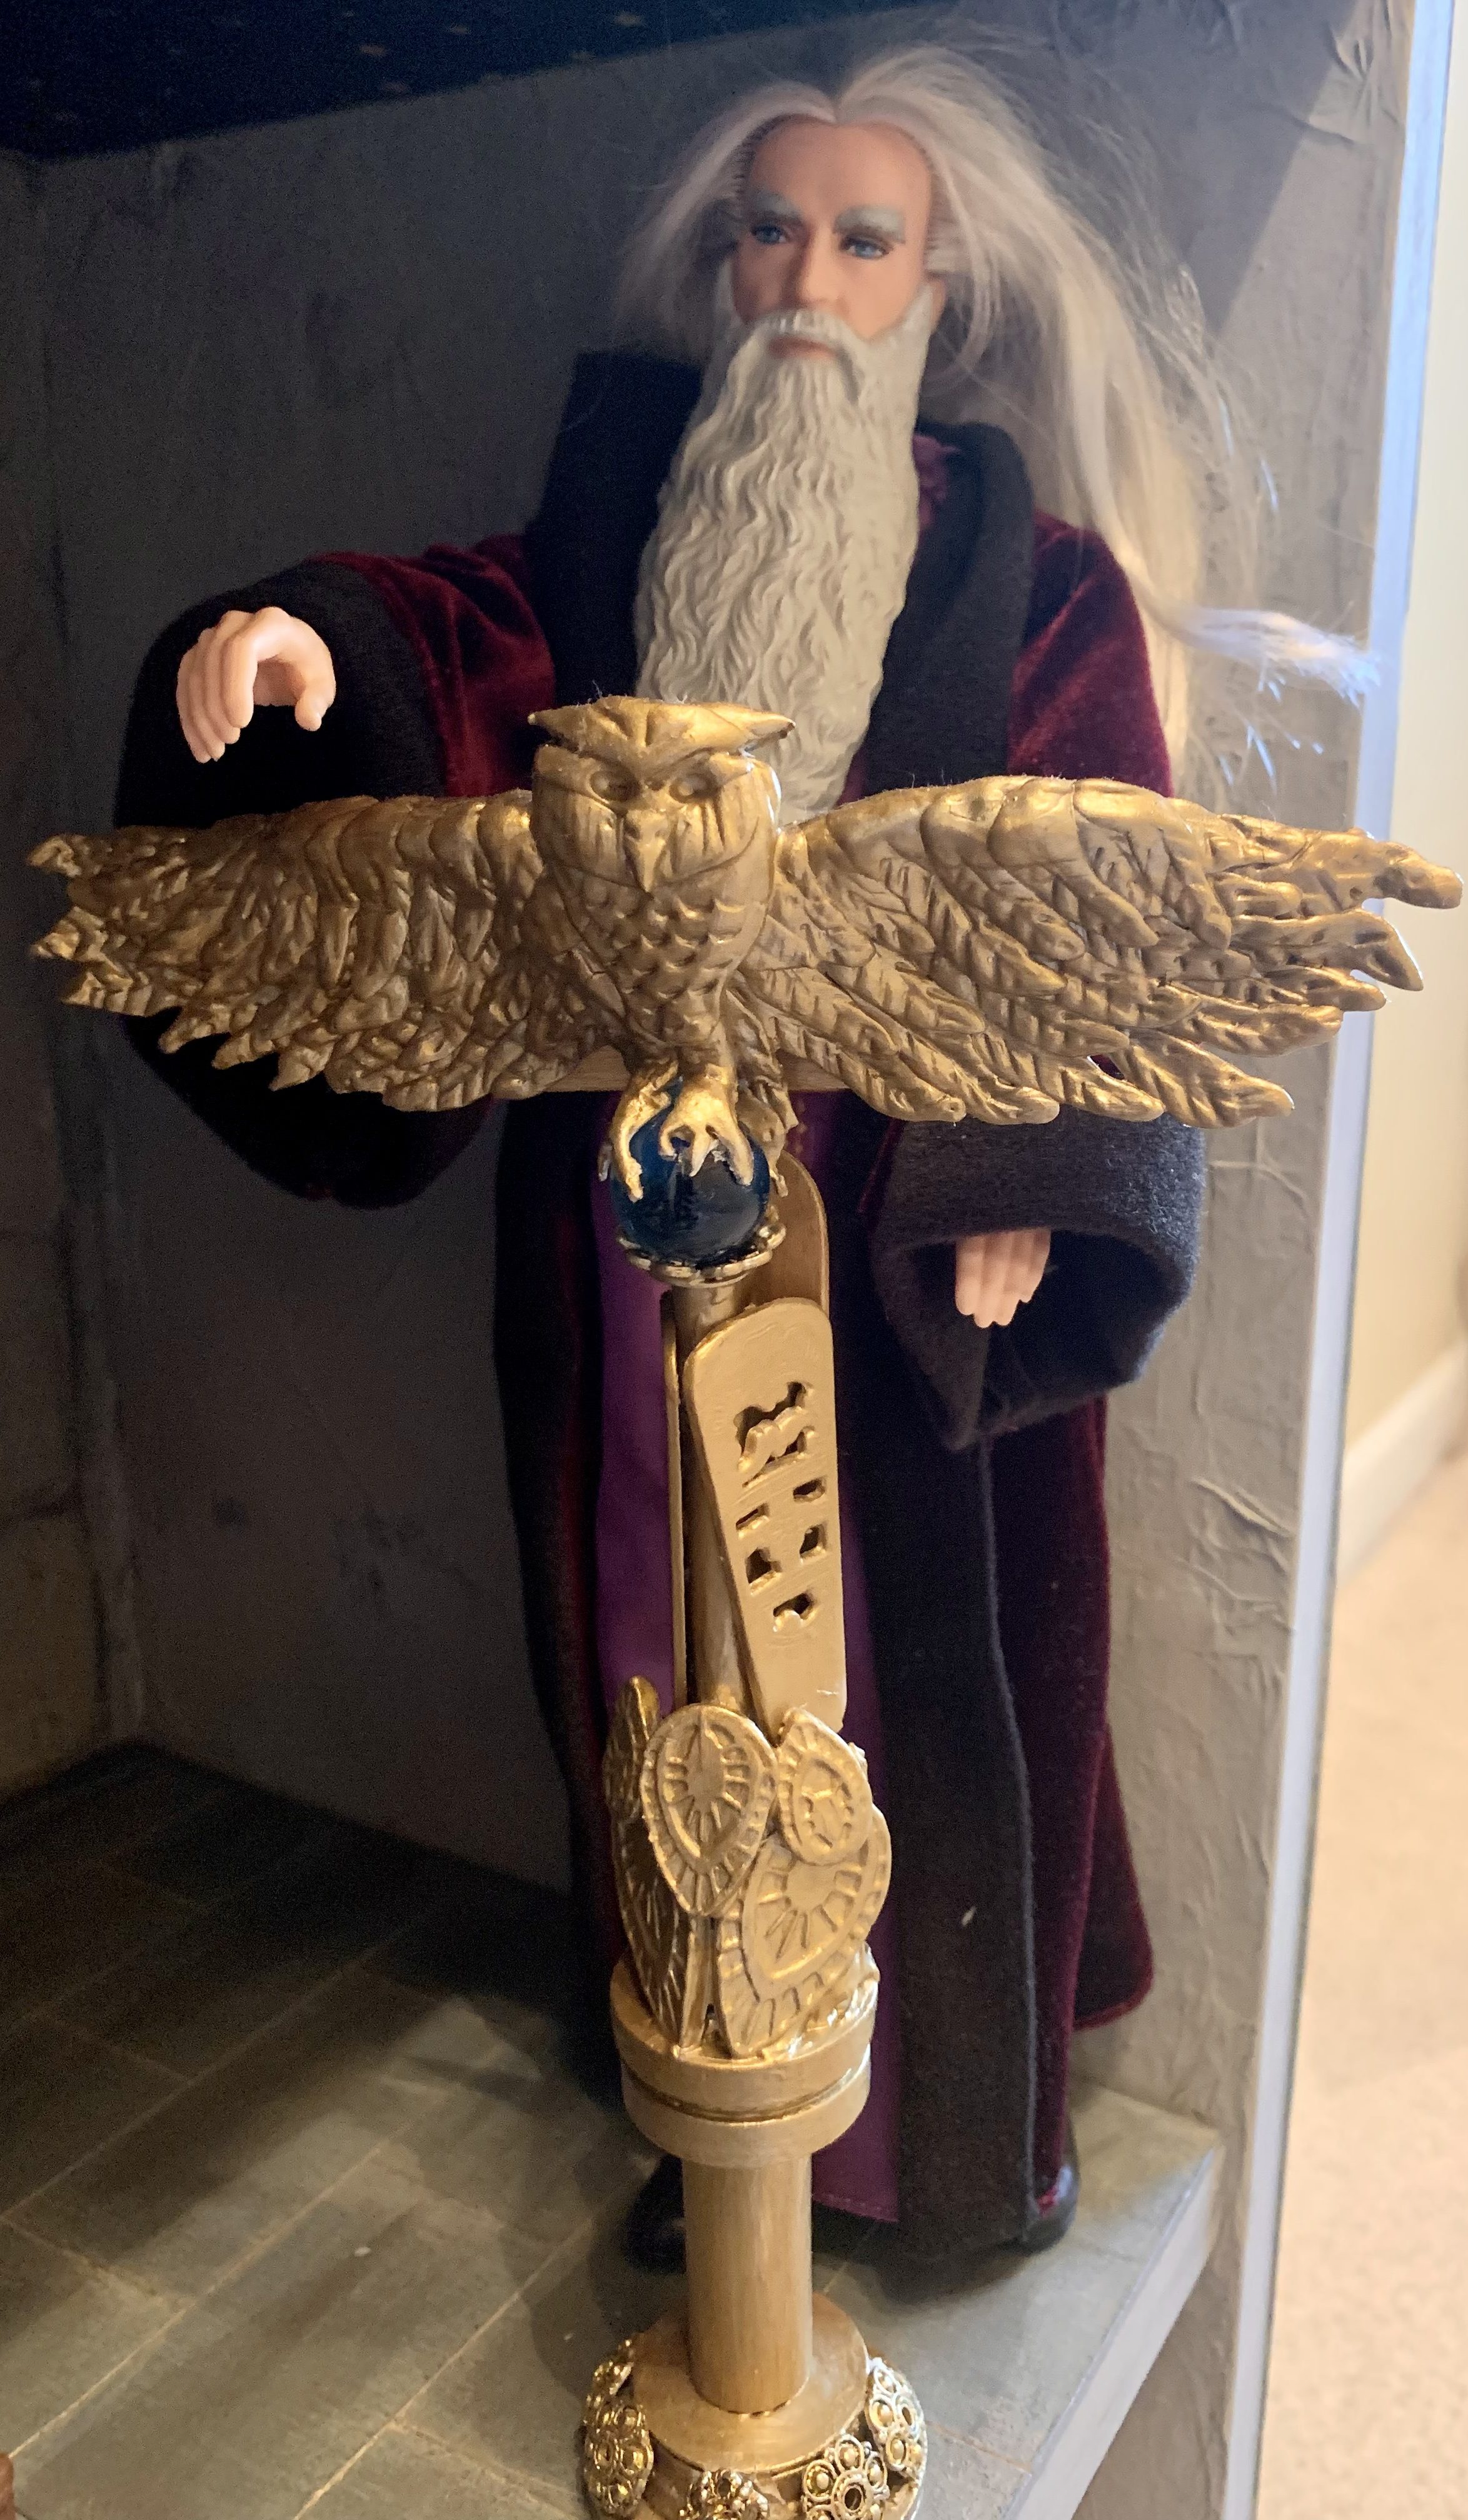 A Dumbledore doll standing at his podium, made from polymer clay and various other items. The top portion of the podium features an owl with its wings spread out, sitting on a blue orb. 